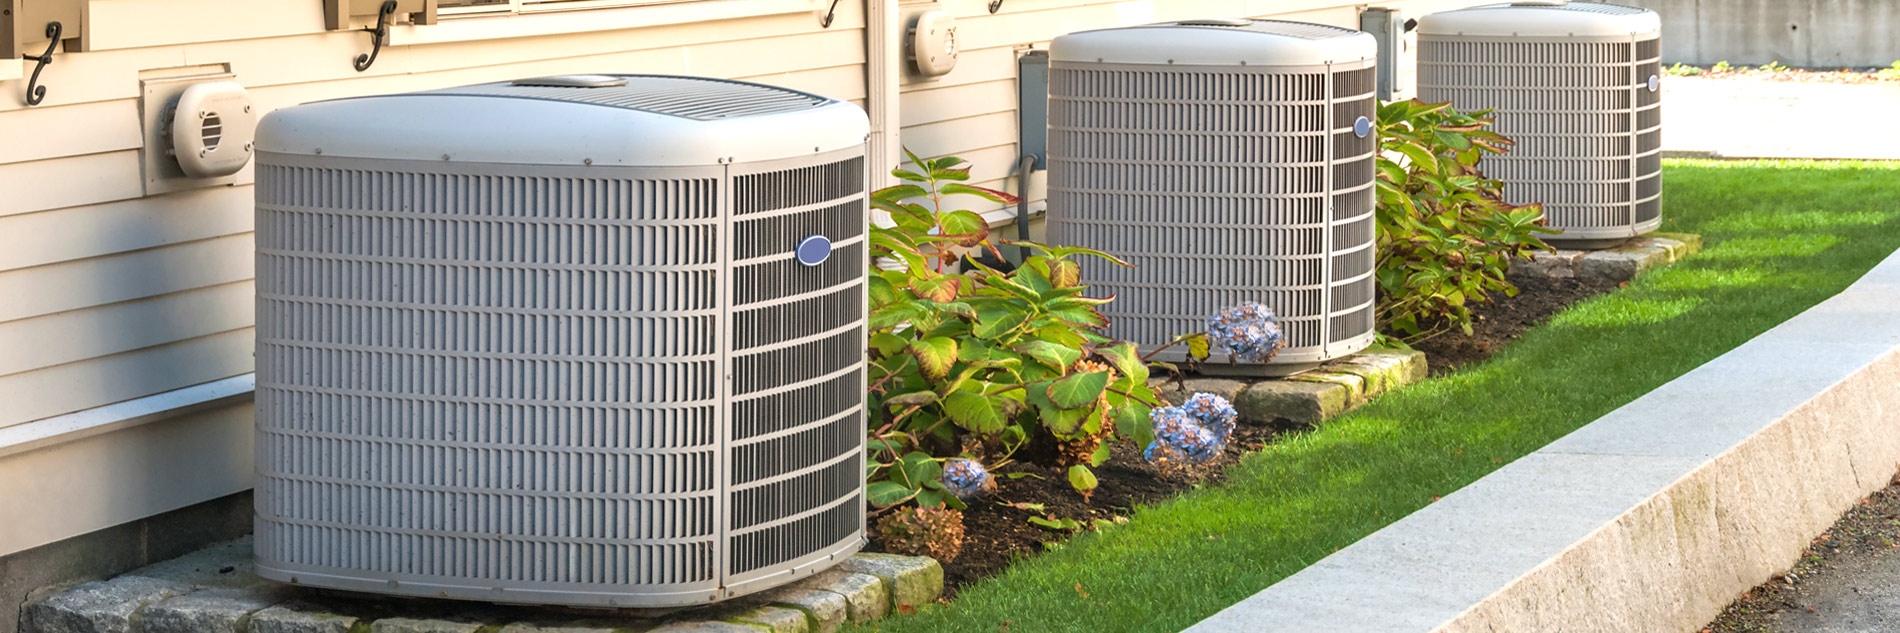 Air Conditioning Installer Chatham-Kent, Ontario